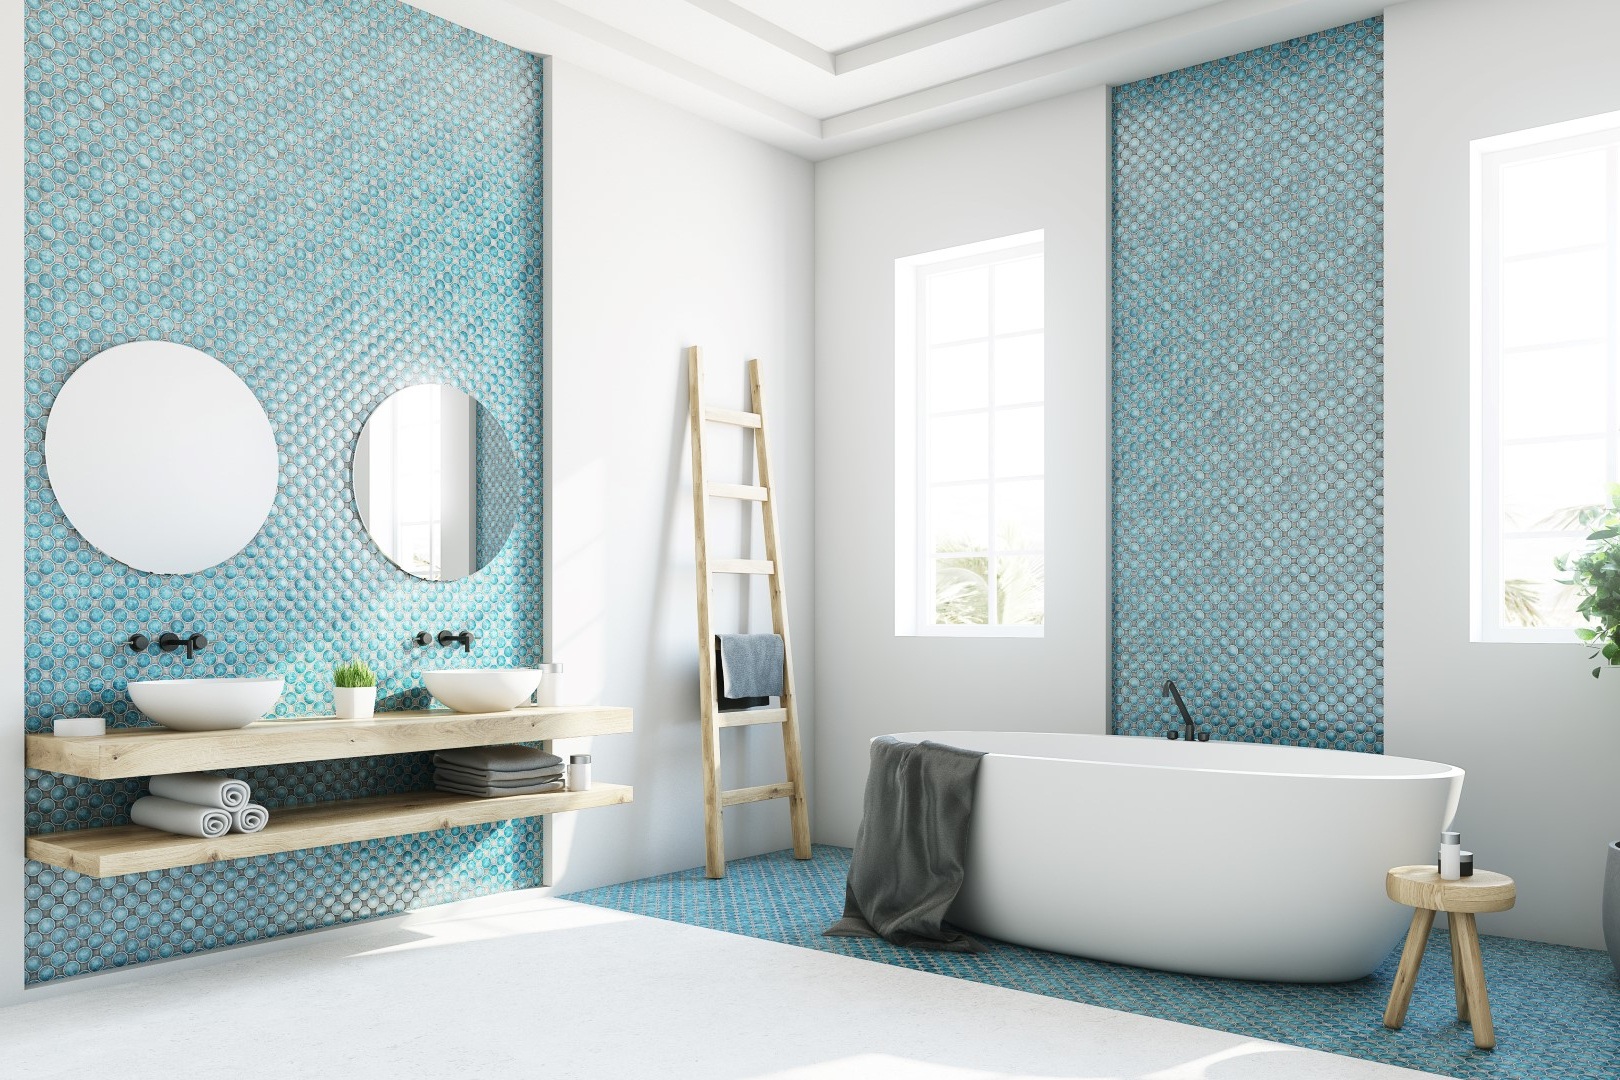 Top 10 Bathroom Trends For 2018 According To The Experts